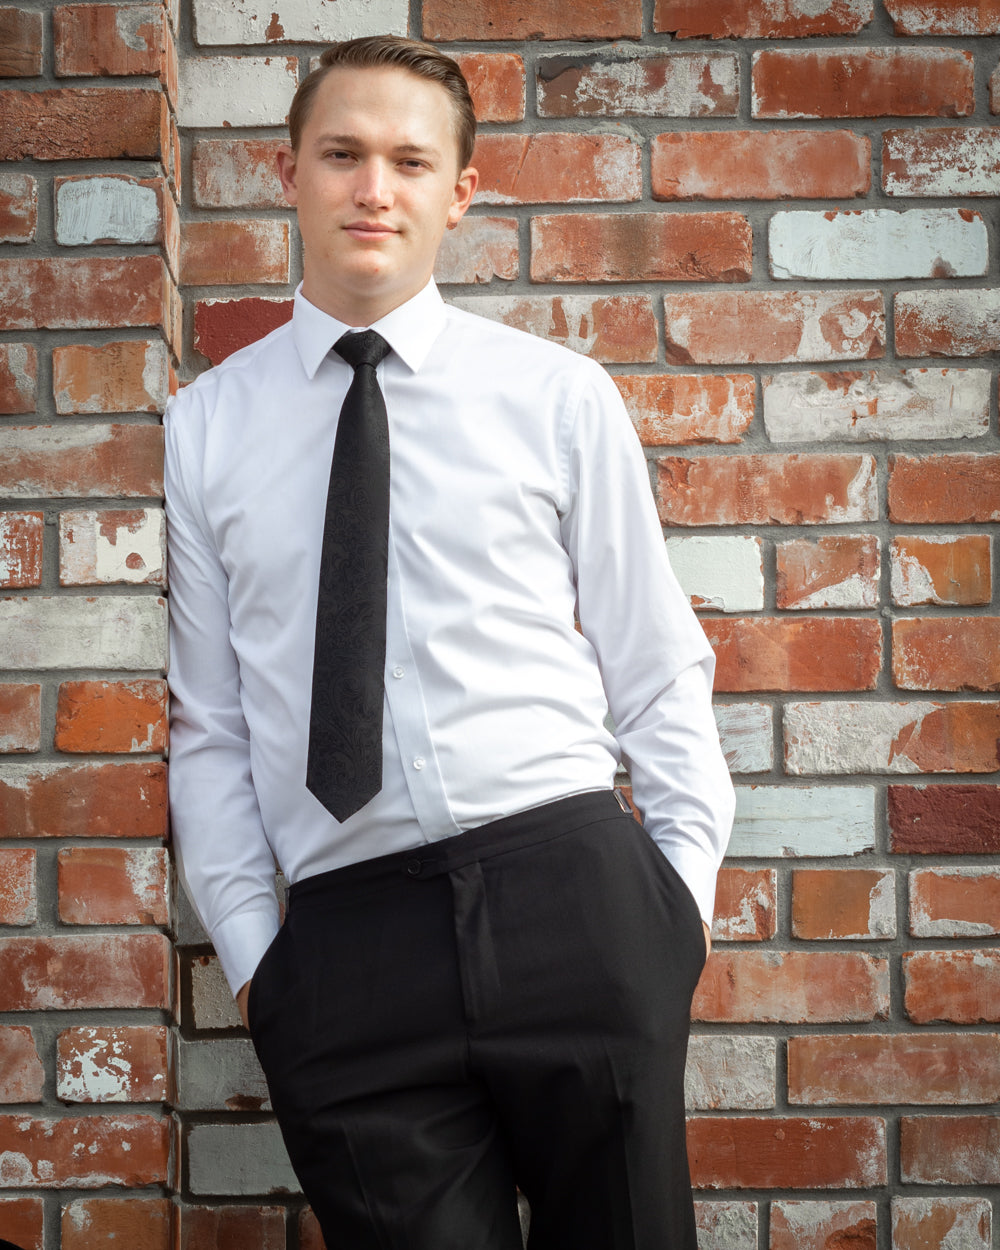 A White plain Collar Slim-fit shirt made from a soft easy care fabric and featuring a placket front a plain cuff, a darted back and a back yoke.